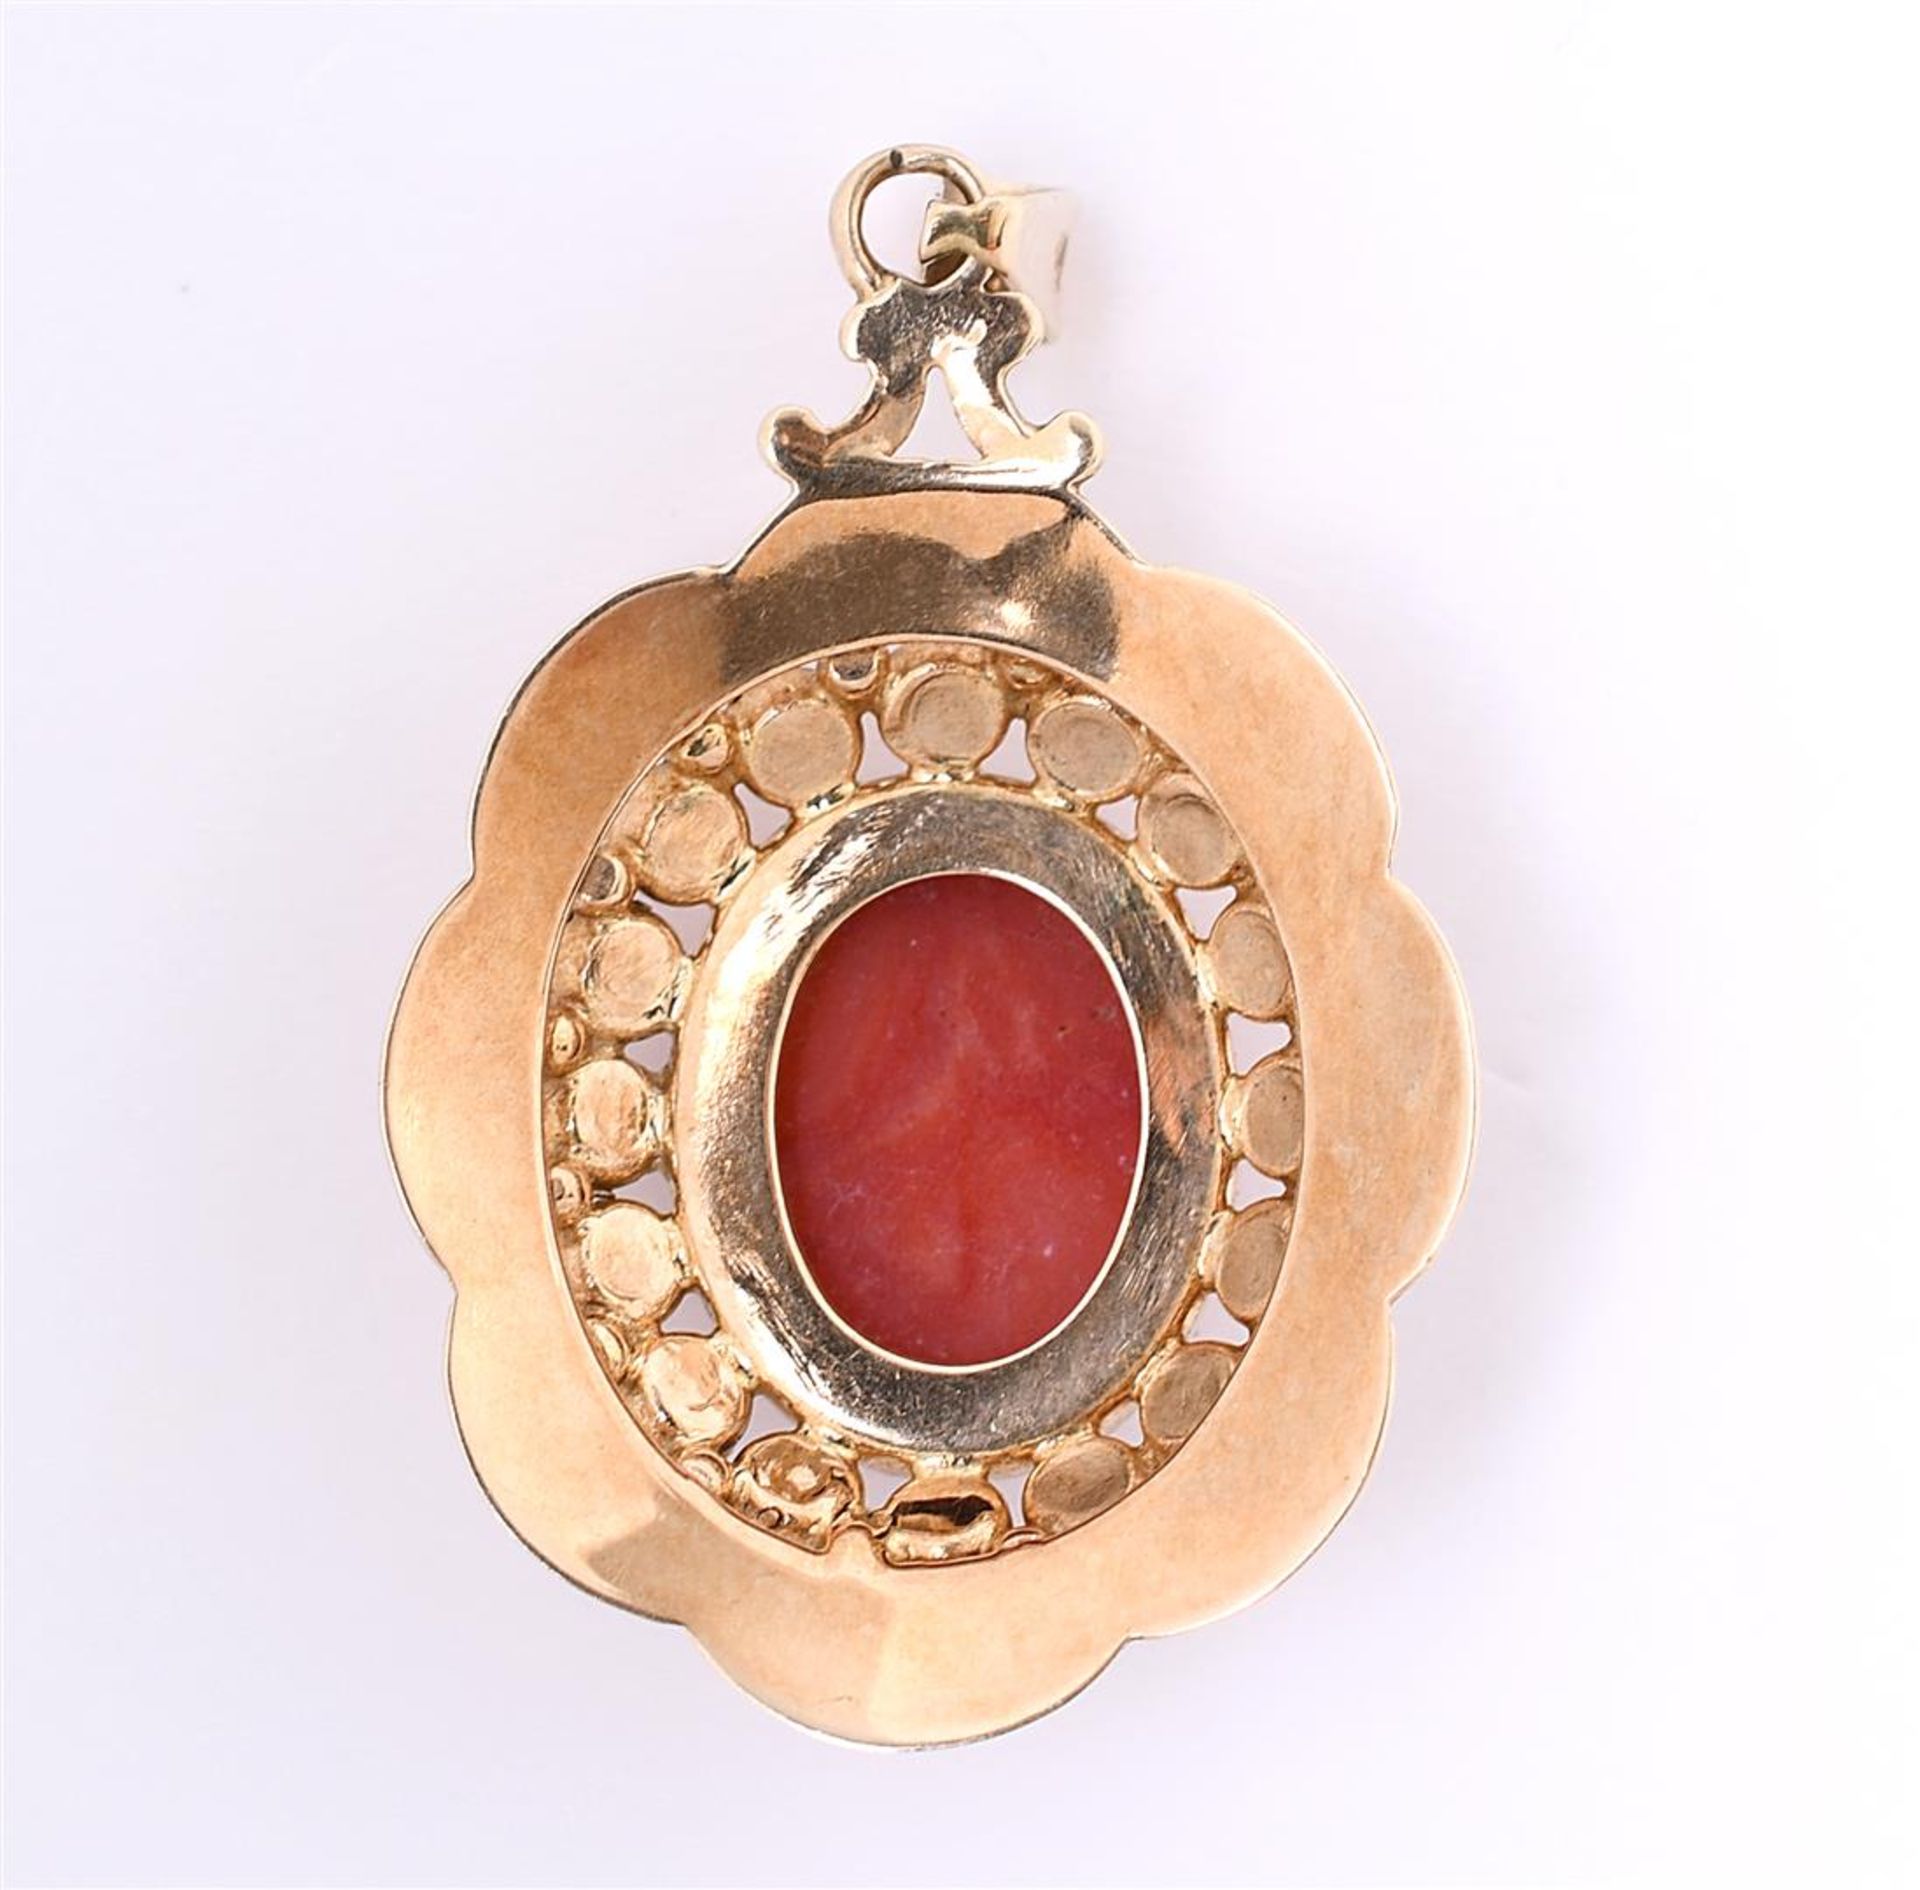 9 carat yellow gold ladies pendant, set in the center with a cabuchon cut red coral - Image 2 of 3